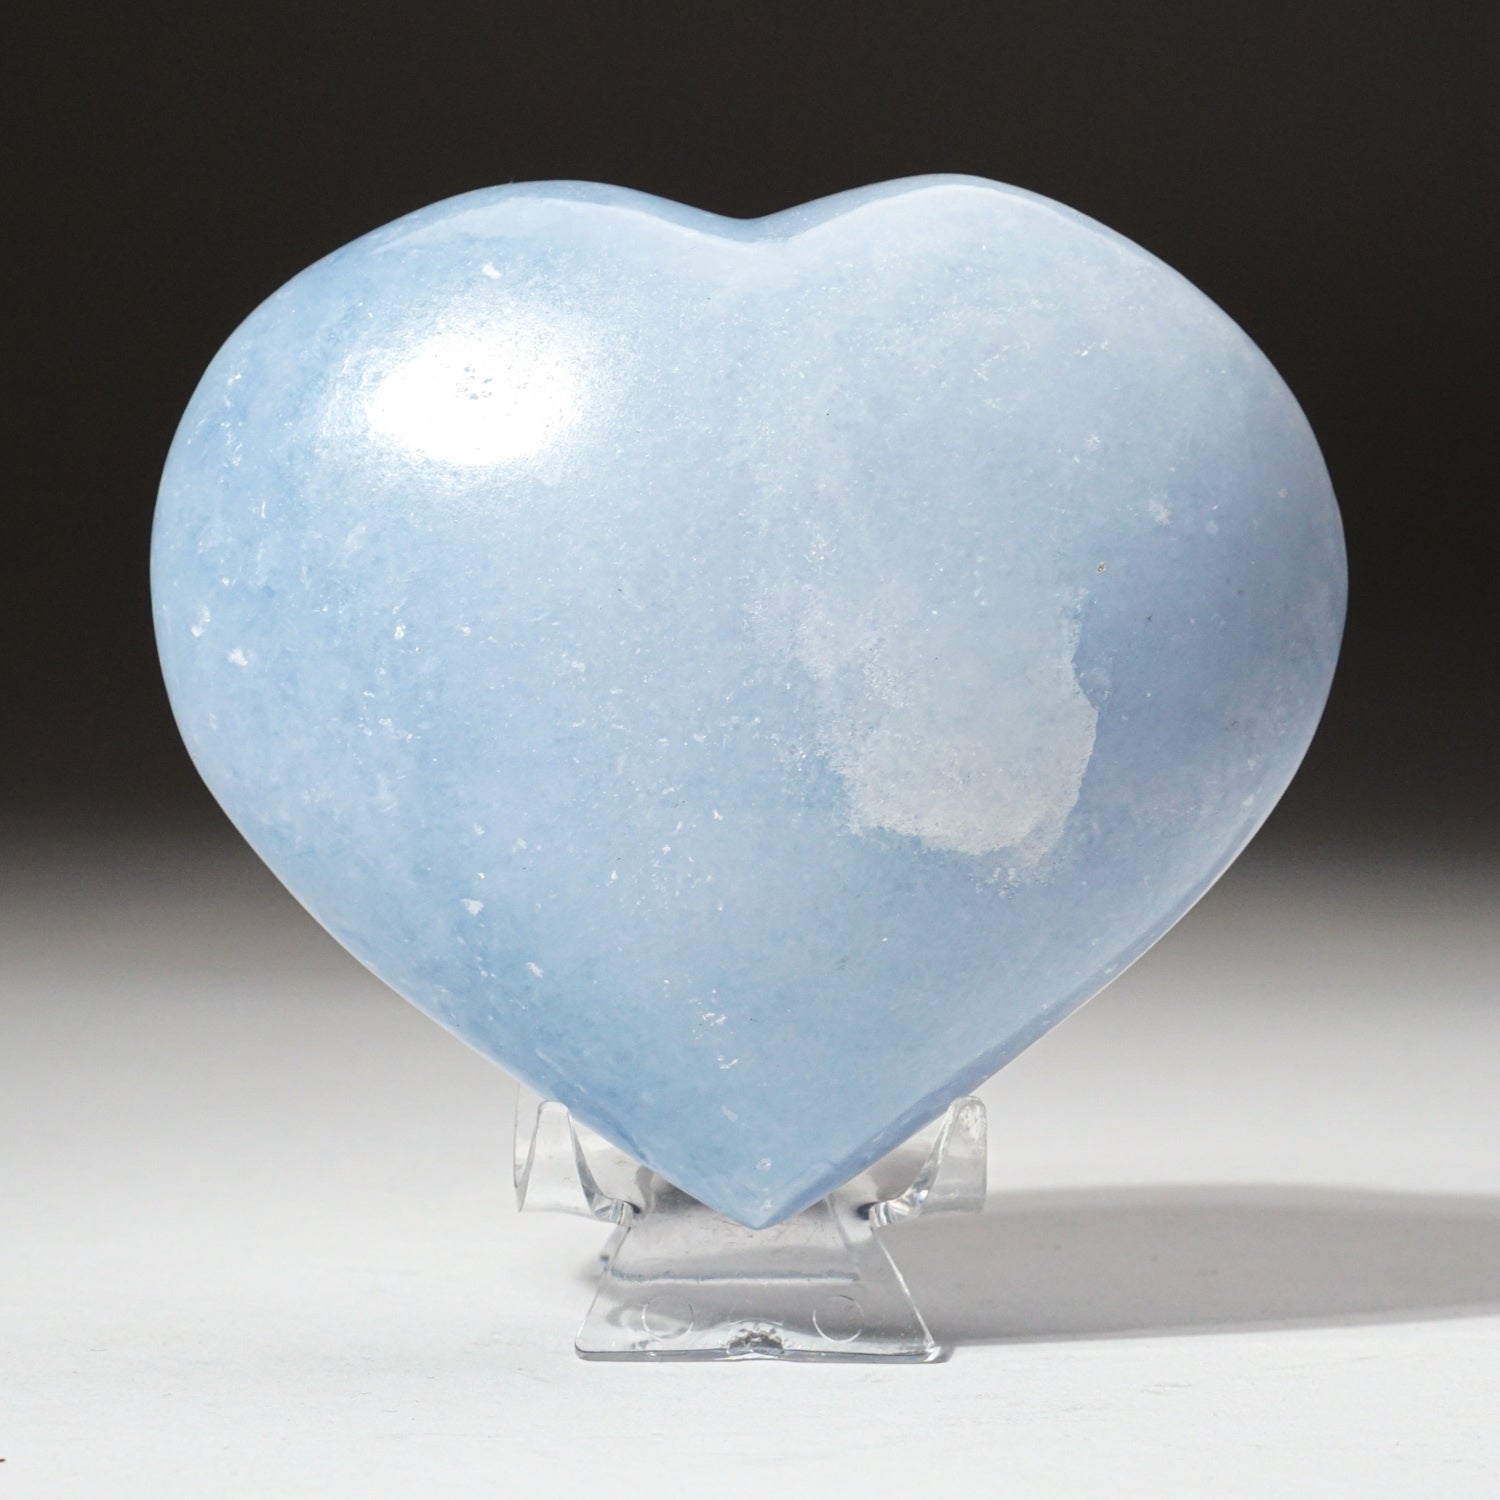 Genuine Polished Blue Calcite Heart from Mexico (1.5 lbs)